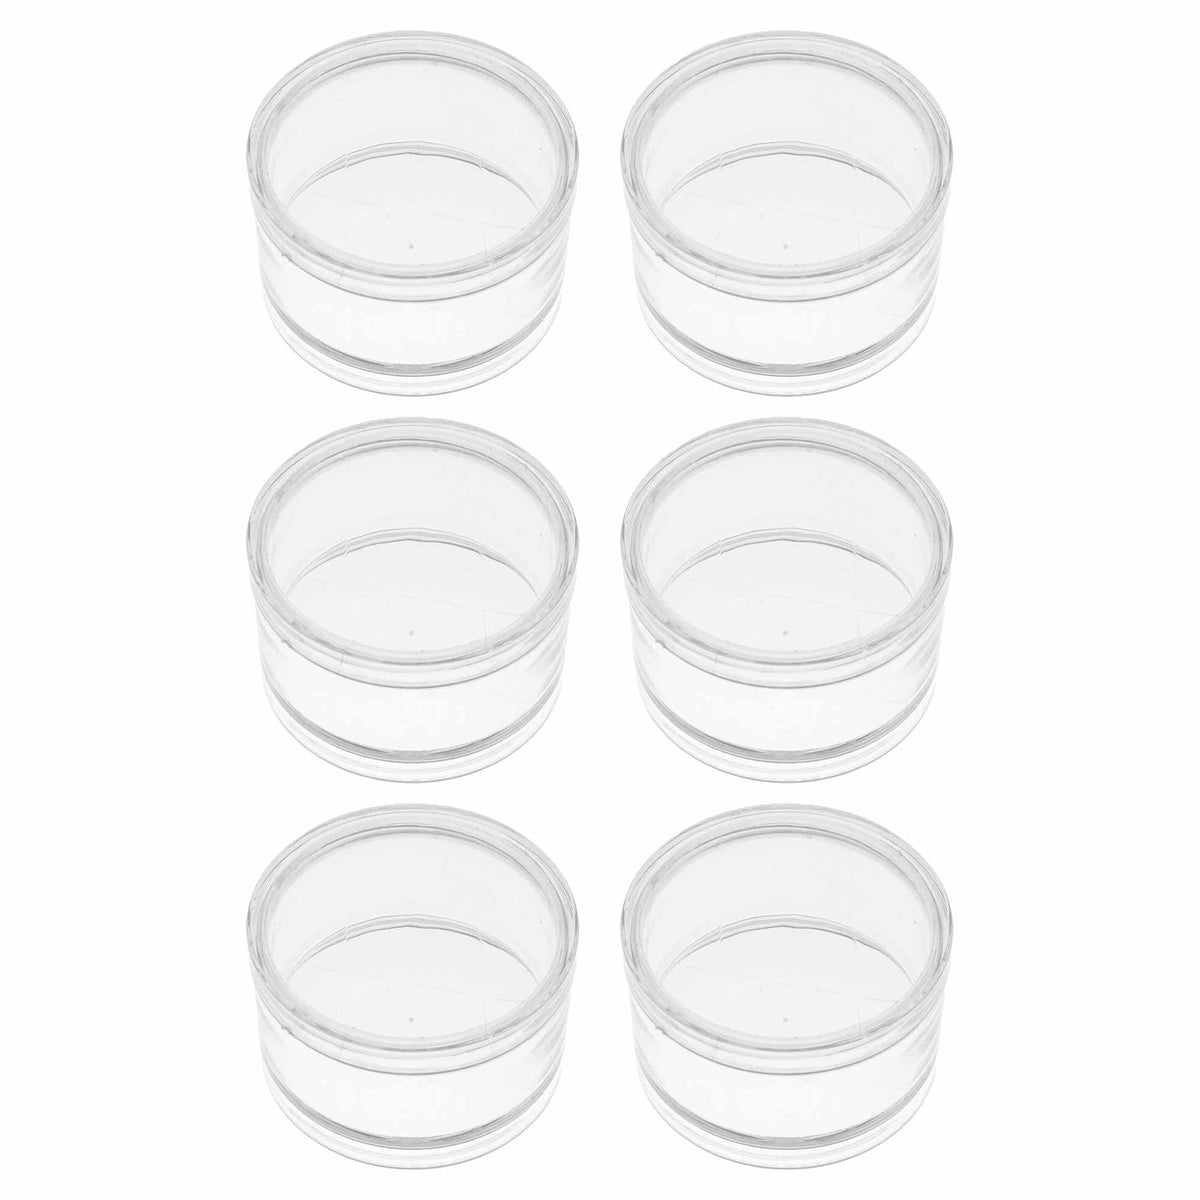  SE Clear Round Plastic Storage Containers with Screw-On Lids  (Set of 12) - 87440BB